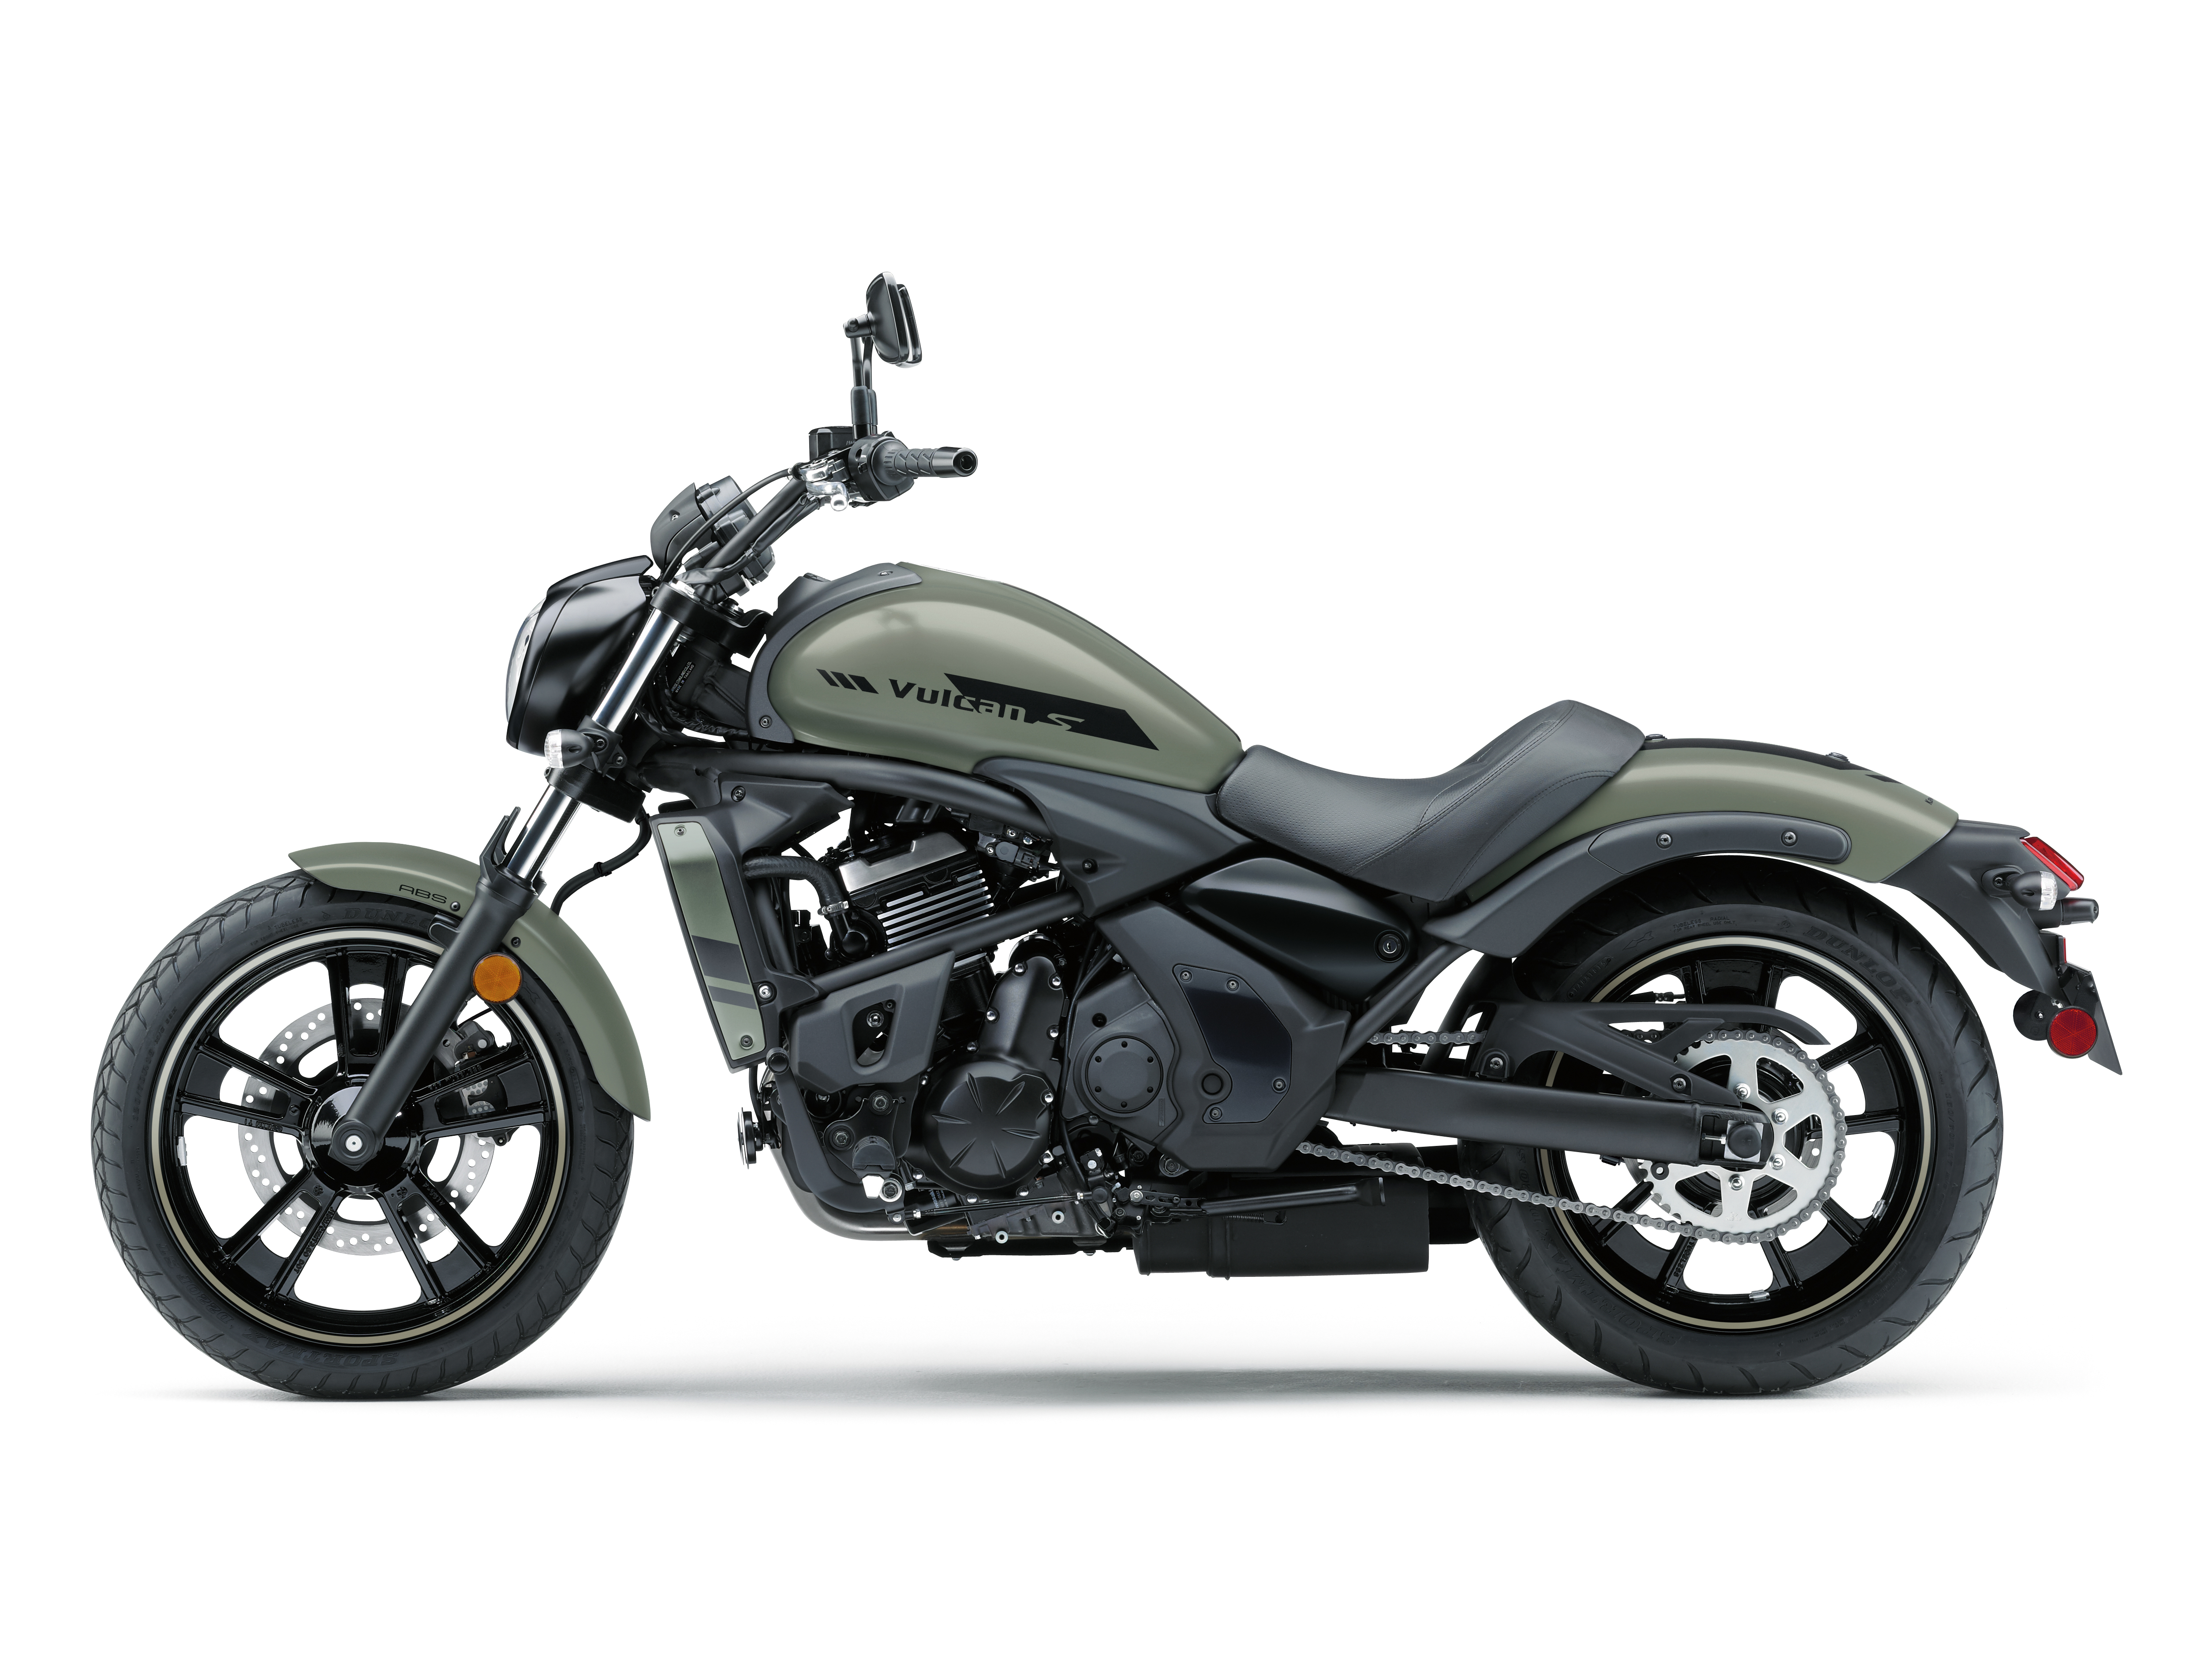 Kawasaki Vulcan 650S New in Stock for sale in Cork for undefined on  DoneDeal